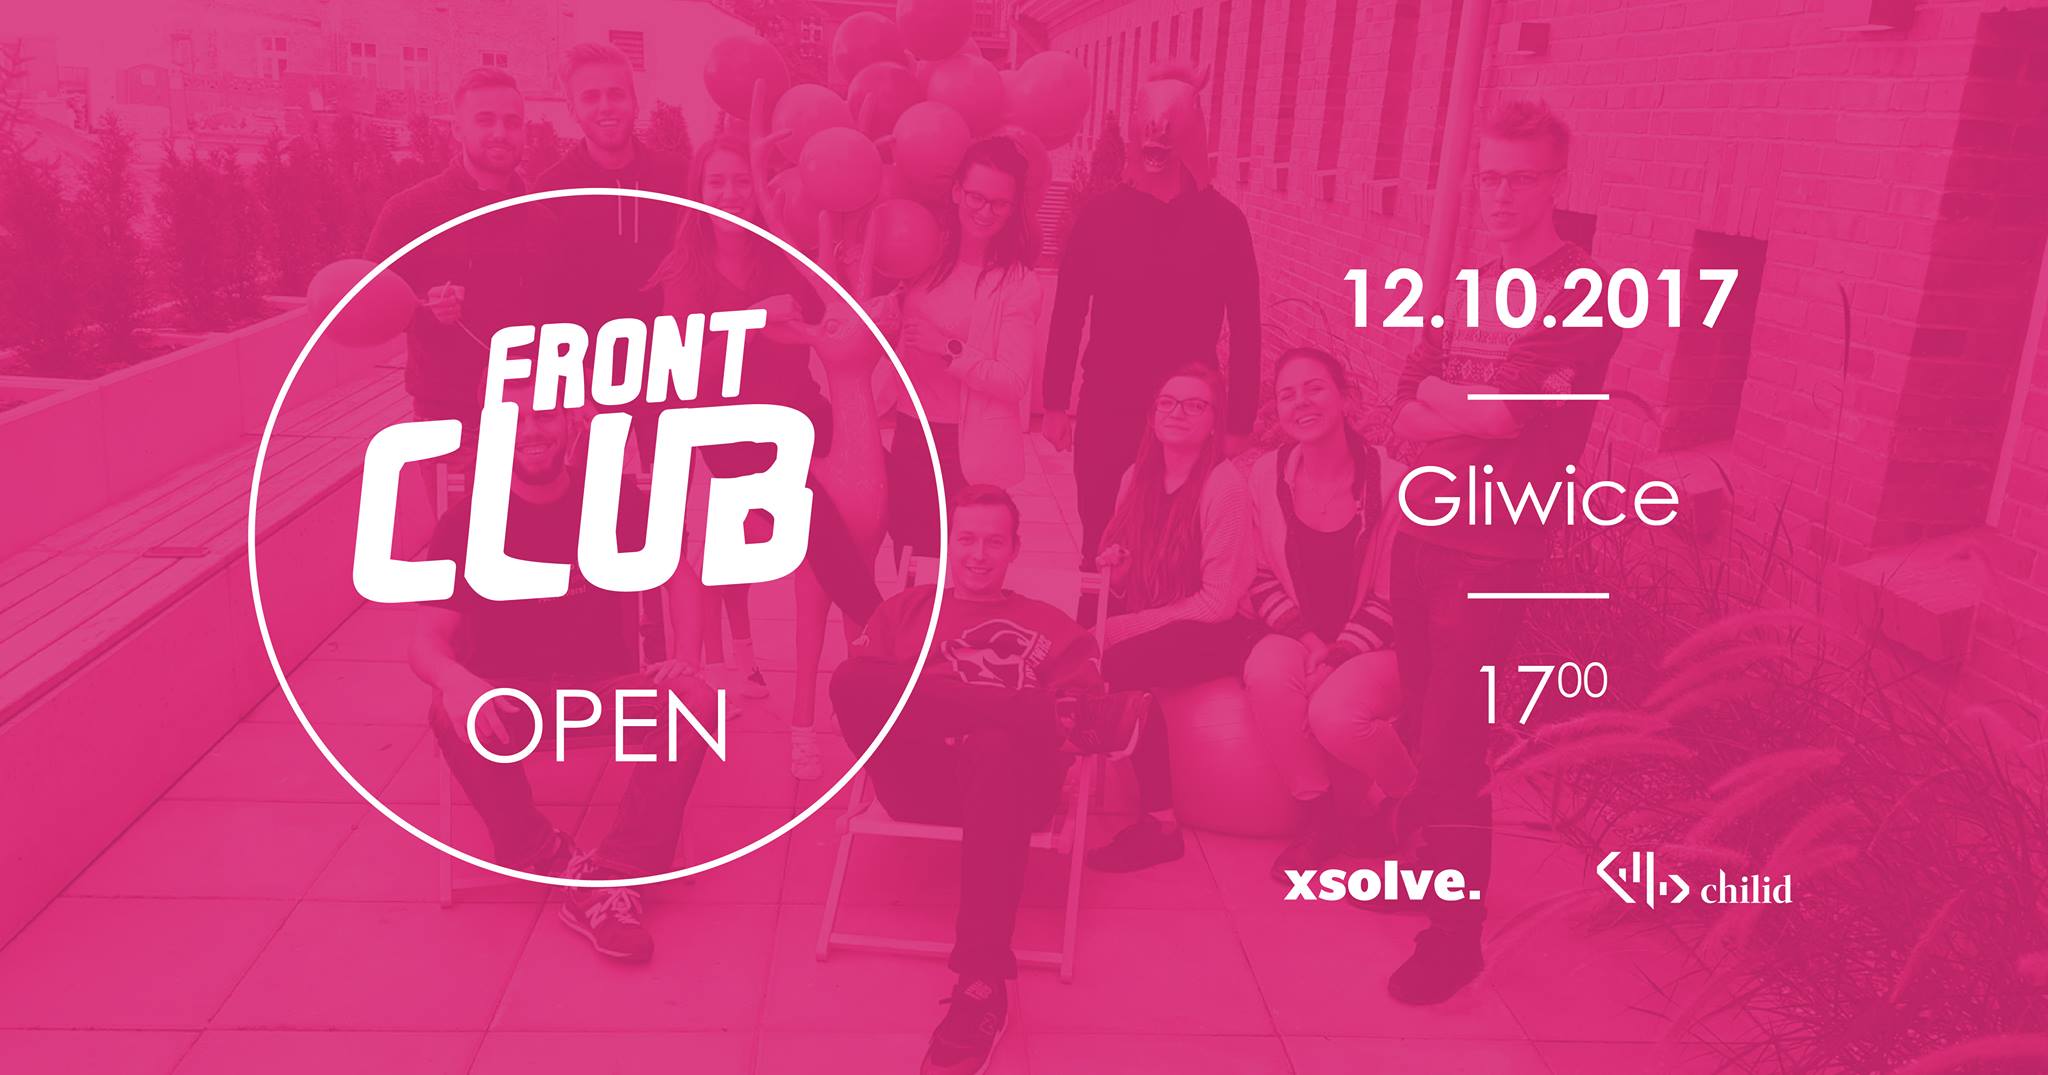 Welcome to the first edition of the front club open!